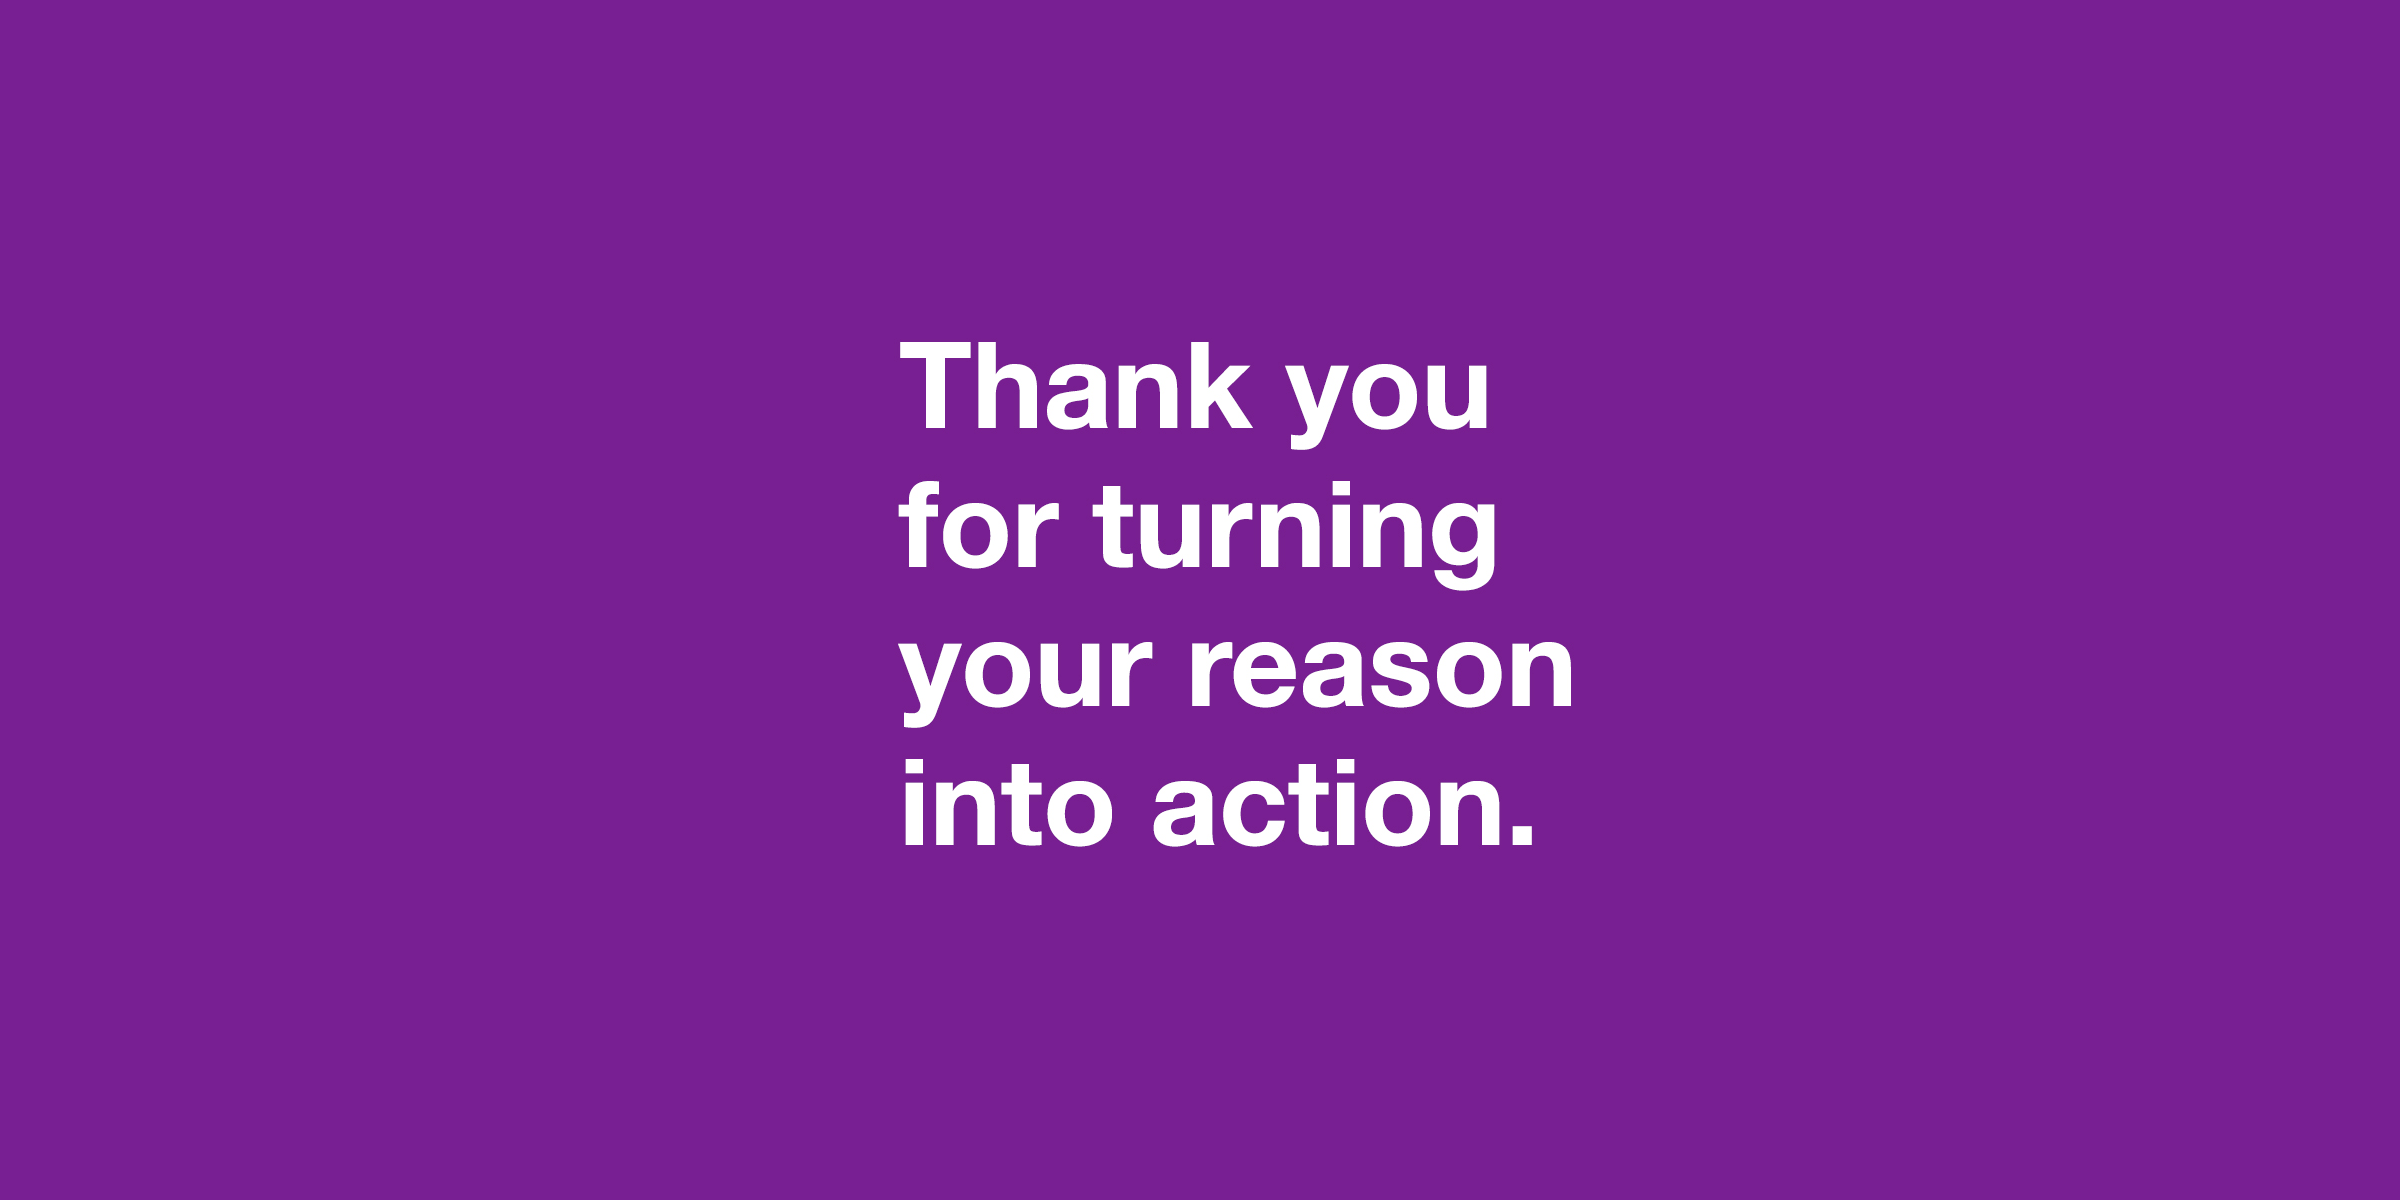 Thank you for turning your reason into action